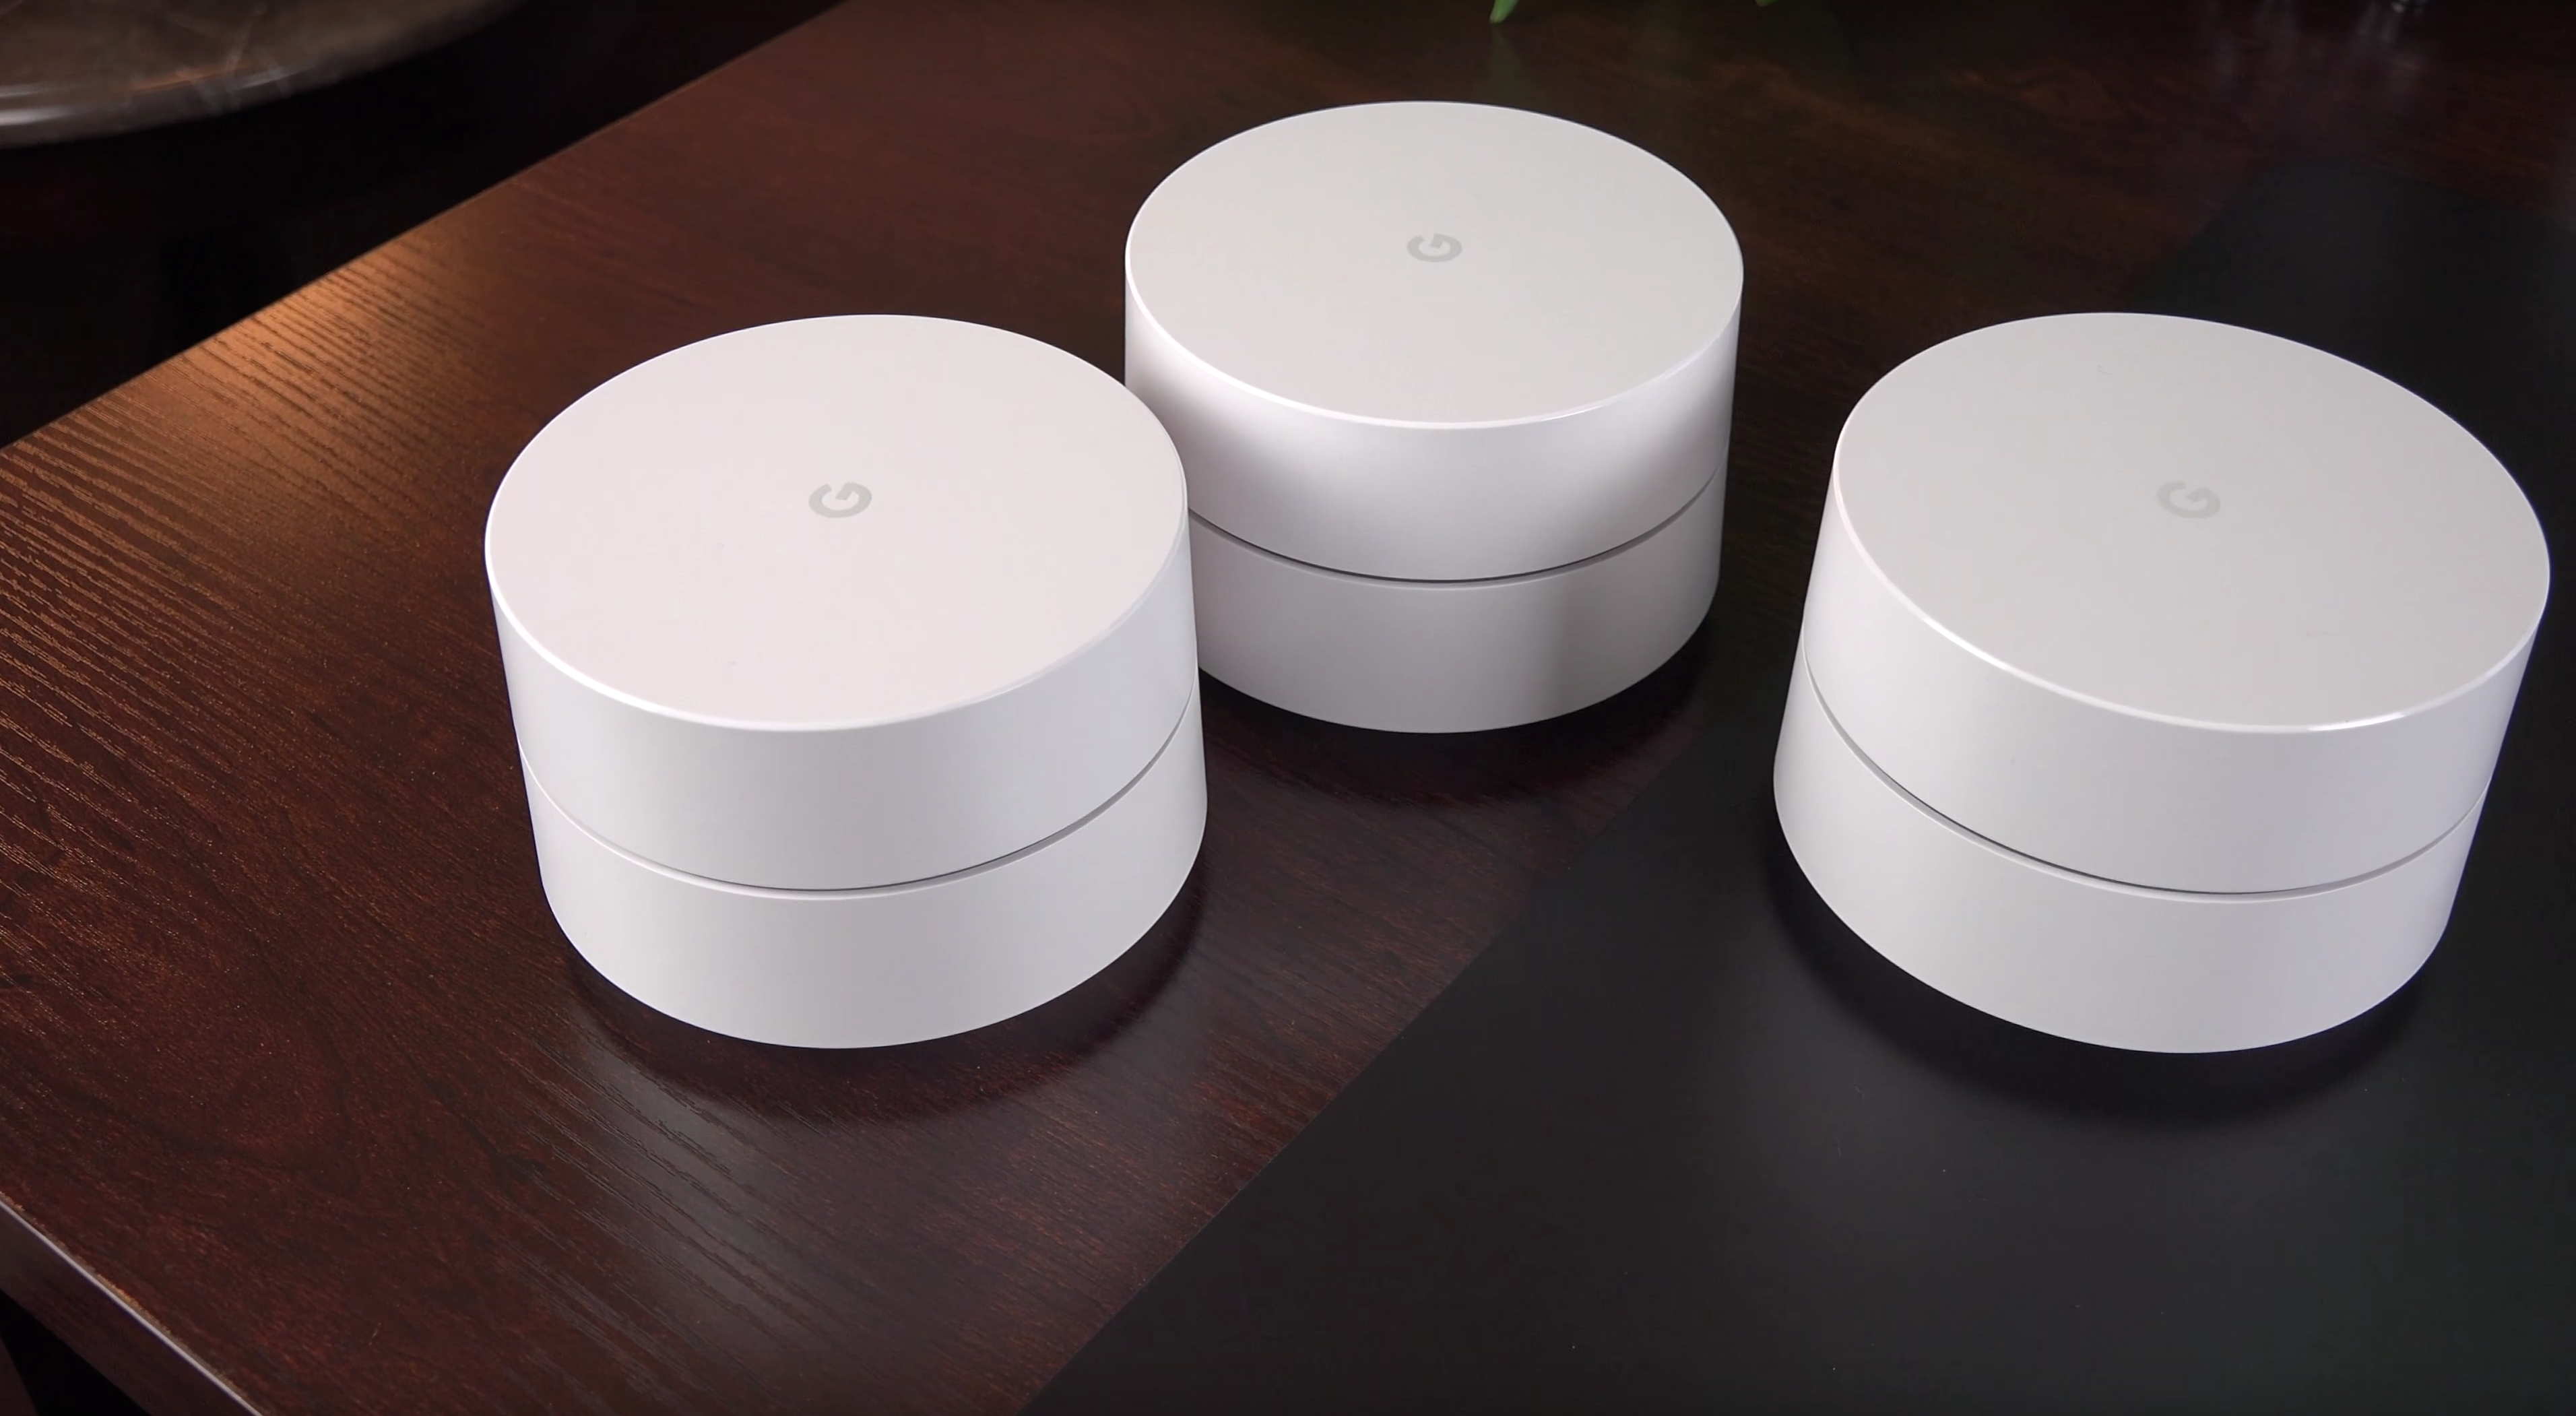 Difference Between Google WiFi and Nest WiFi